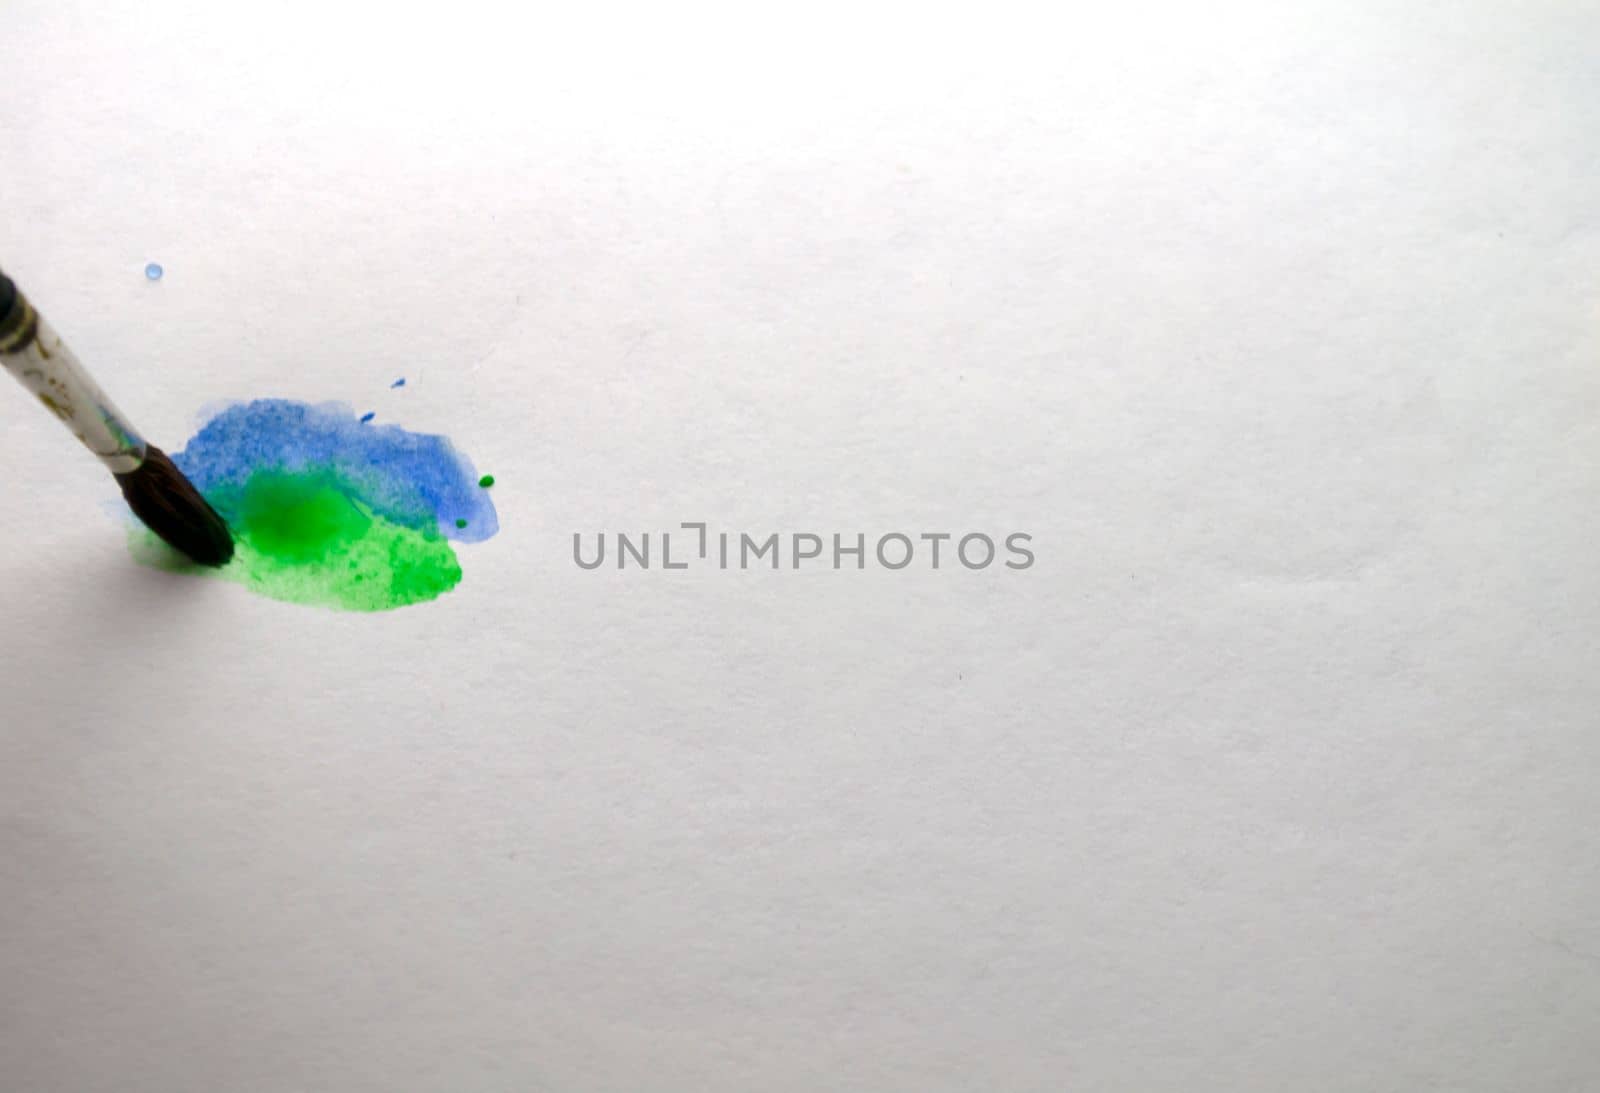 The brush draws blue and green paint. The brush draws on white paper with blue and green watercolor paint.